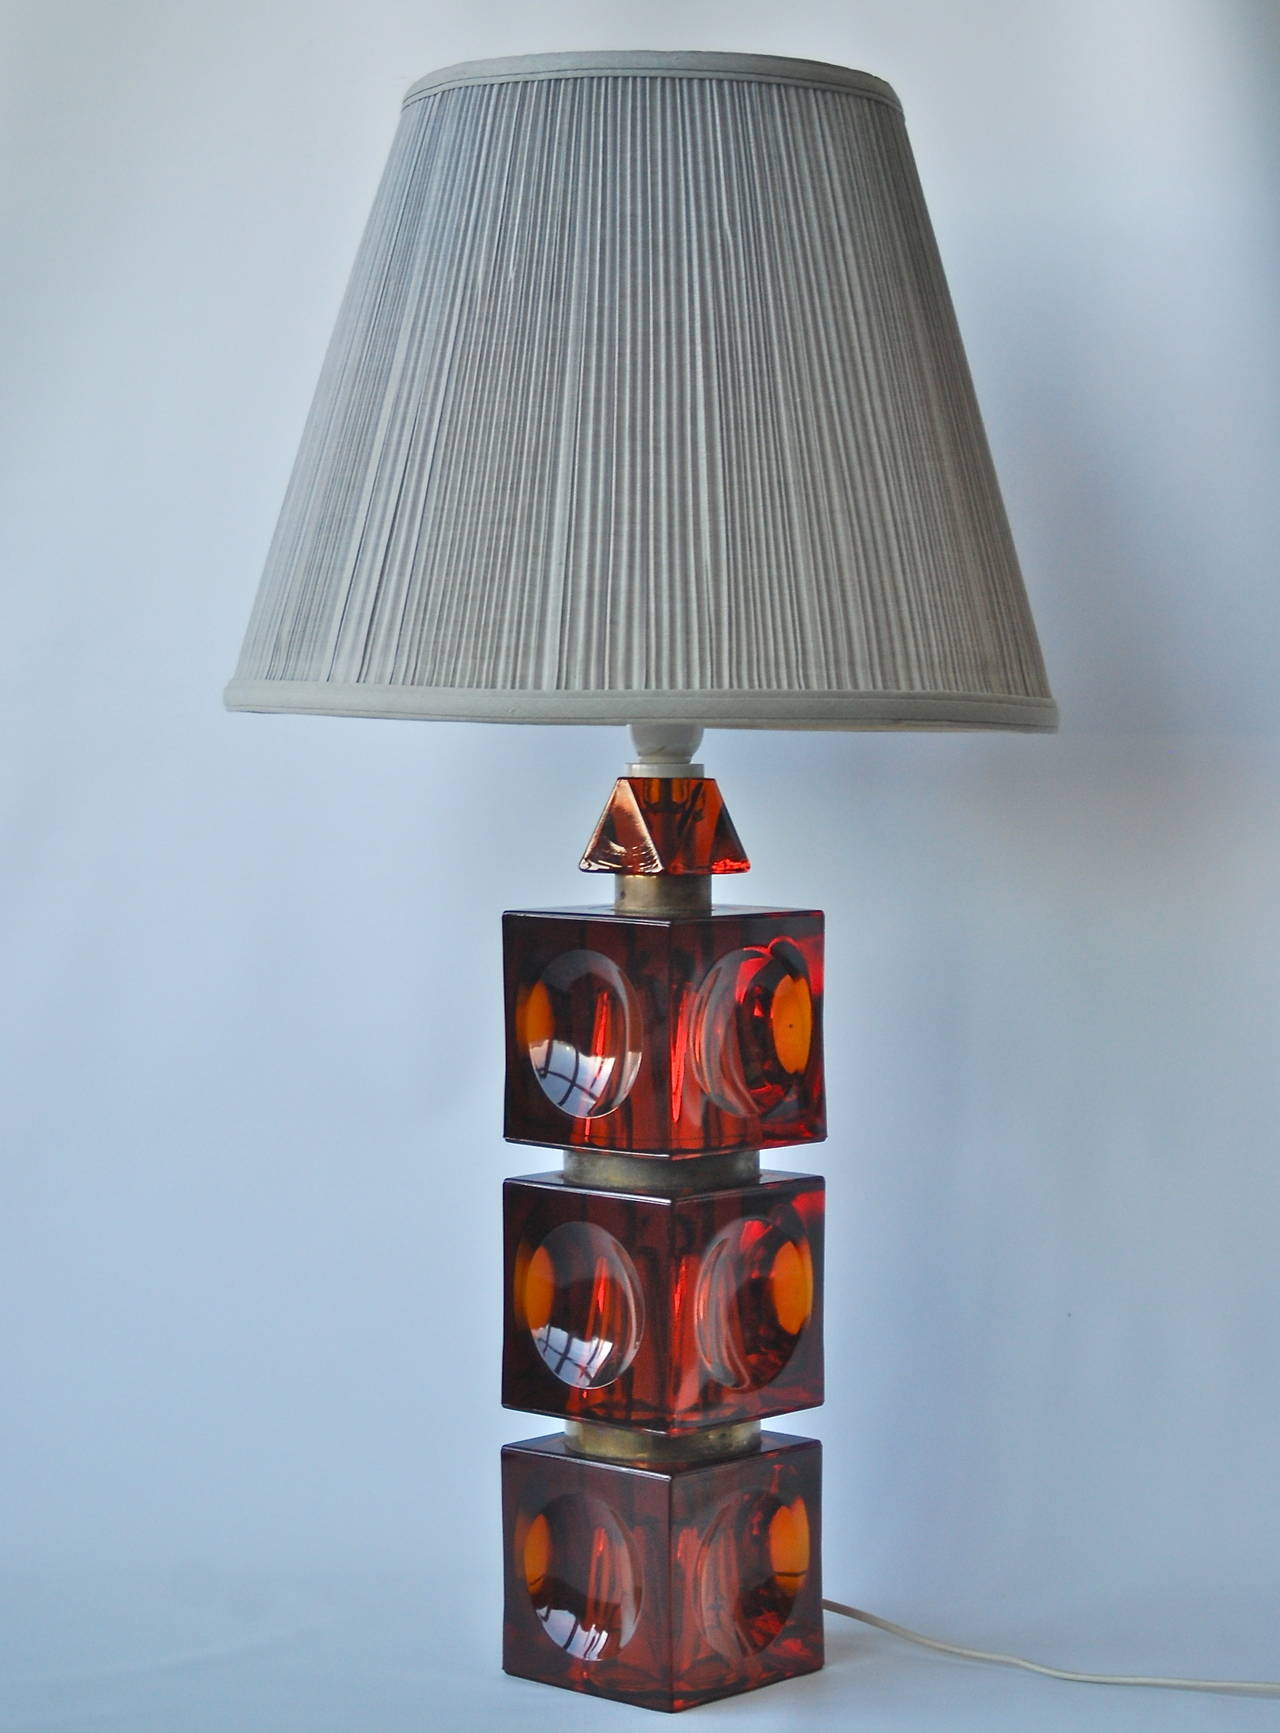 Large table lamp designed by Carl Fagerlund for Orrefors, Sweden, circa 1960s. Existing European wiring, rewiring available upon request.
Glass base dimensions: 15.5